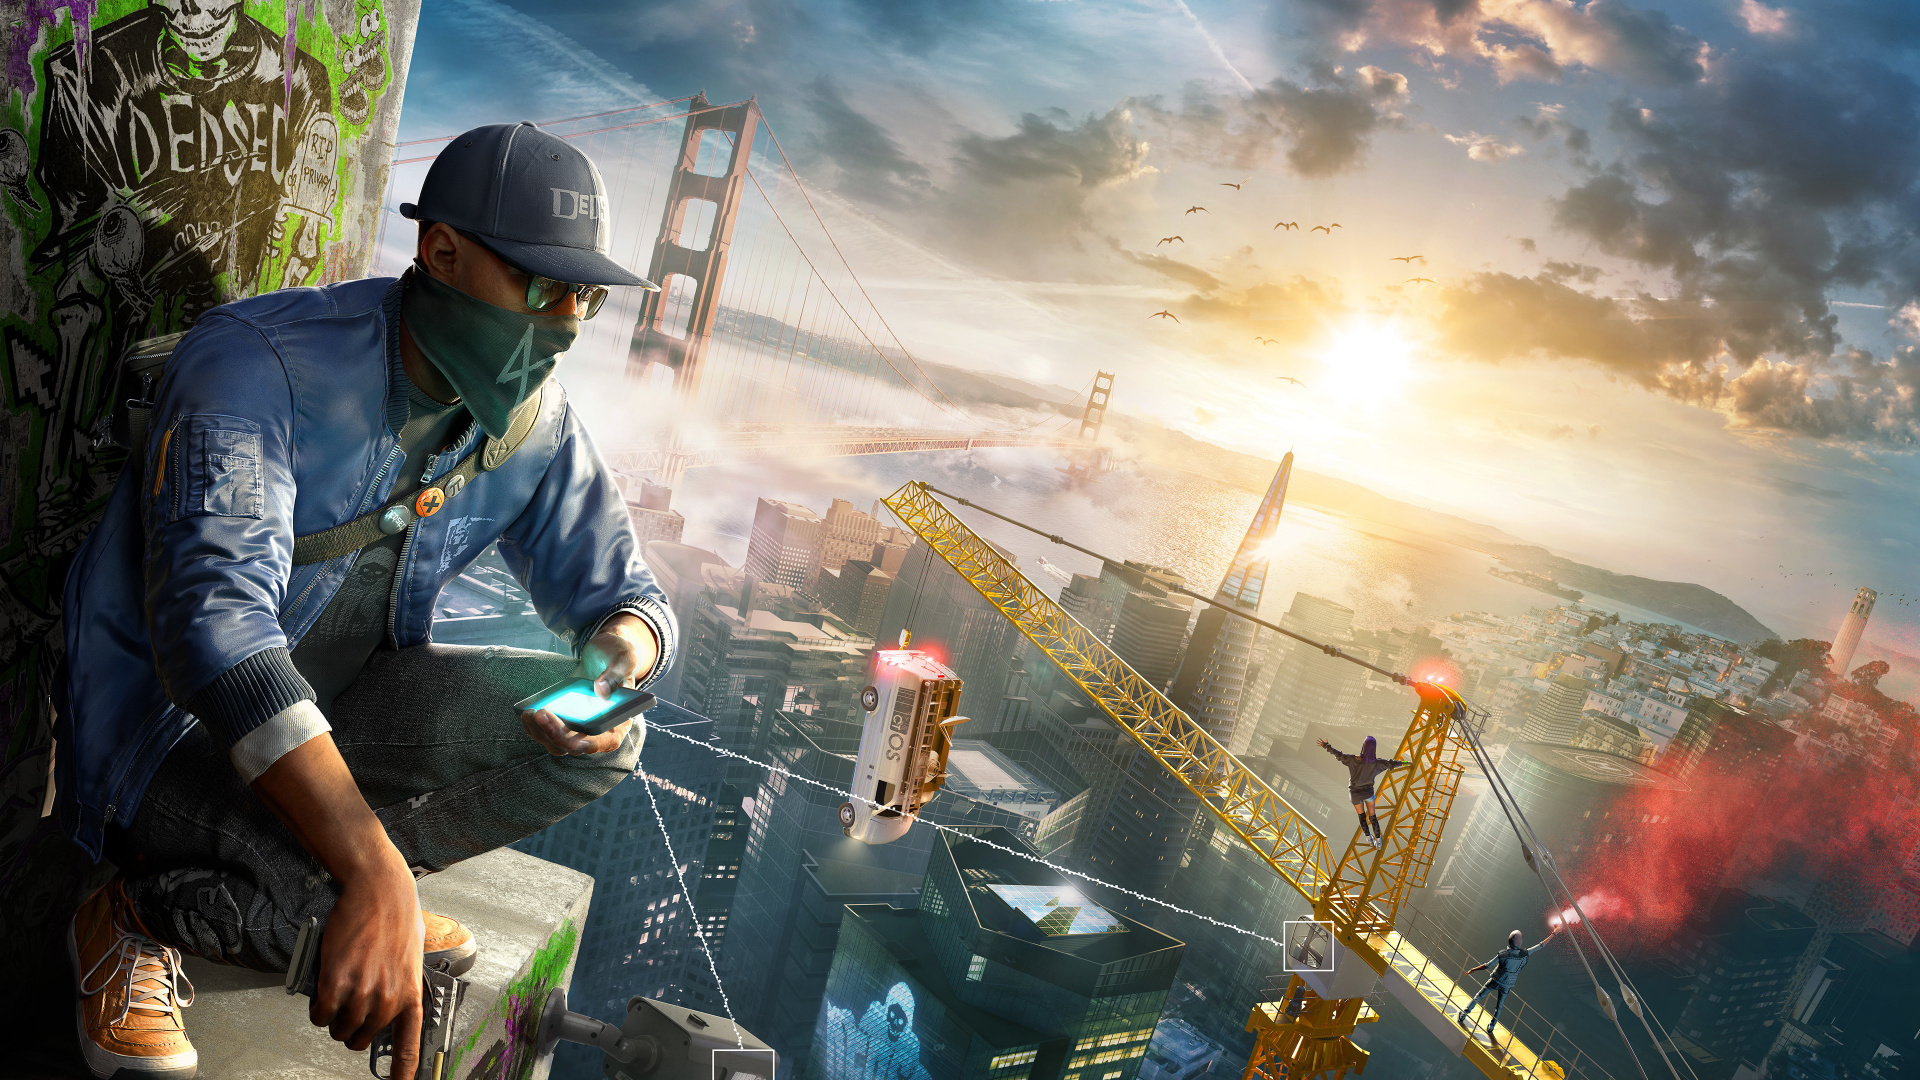 Watch Dogs 2, Watch Dogs, Ubisoft, Playstation 4, Juego de Pc. Wallpaper in 1920x1080 Resolution